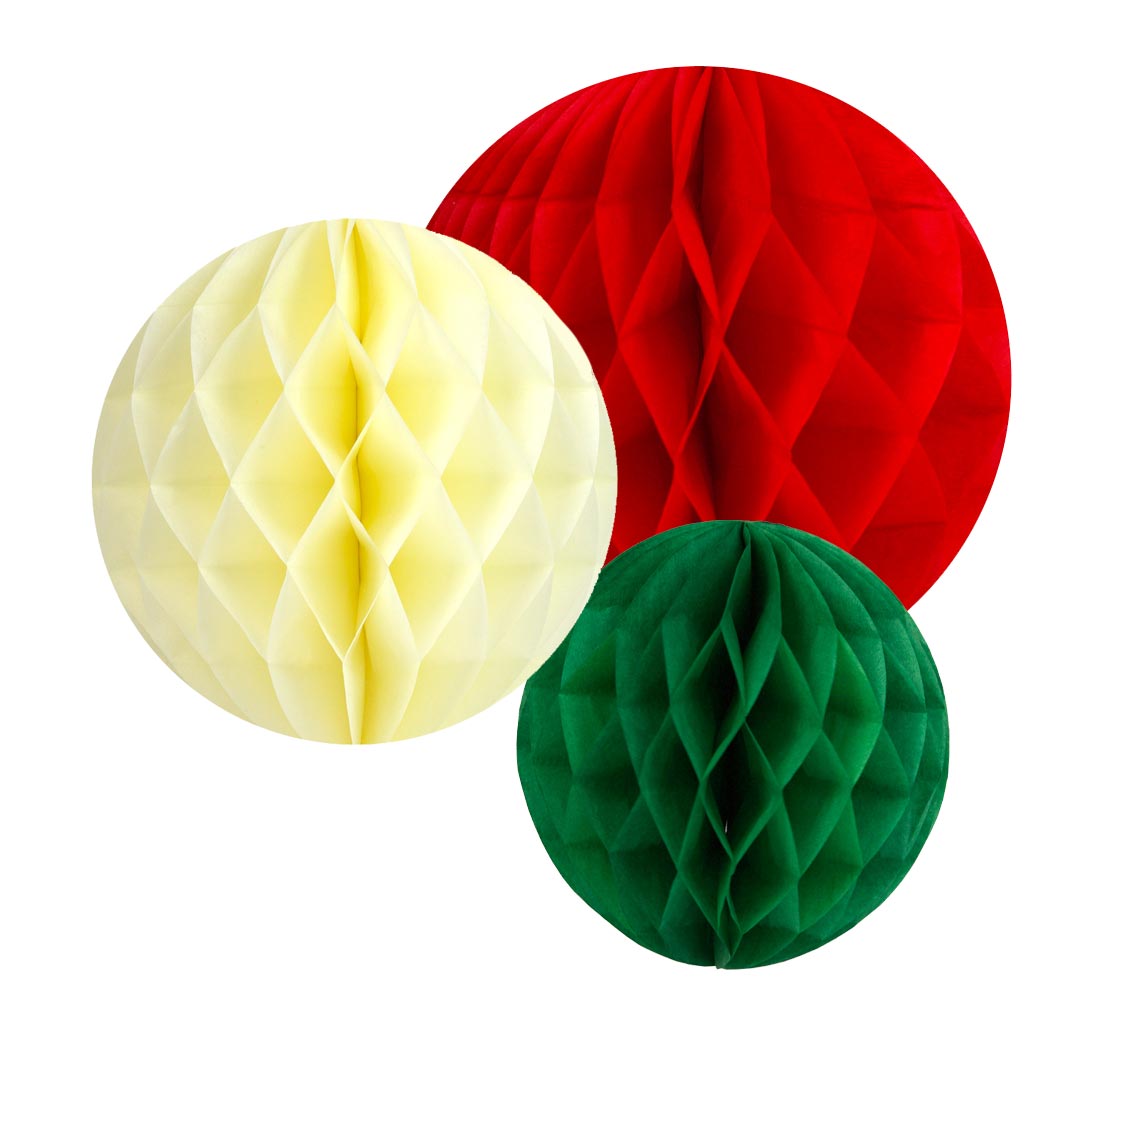 An image of 3 festive coloured honeycomb decoration paper balls - one cream, one dark green and one festive red.